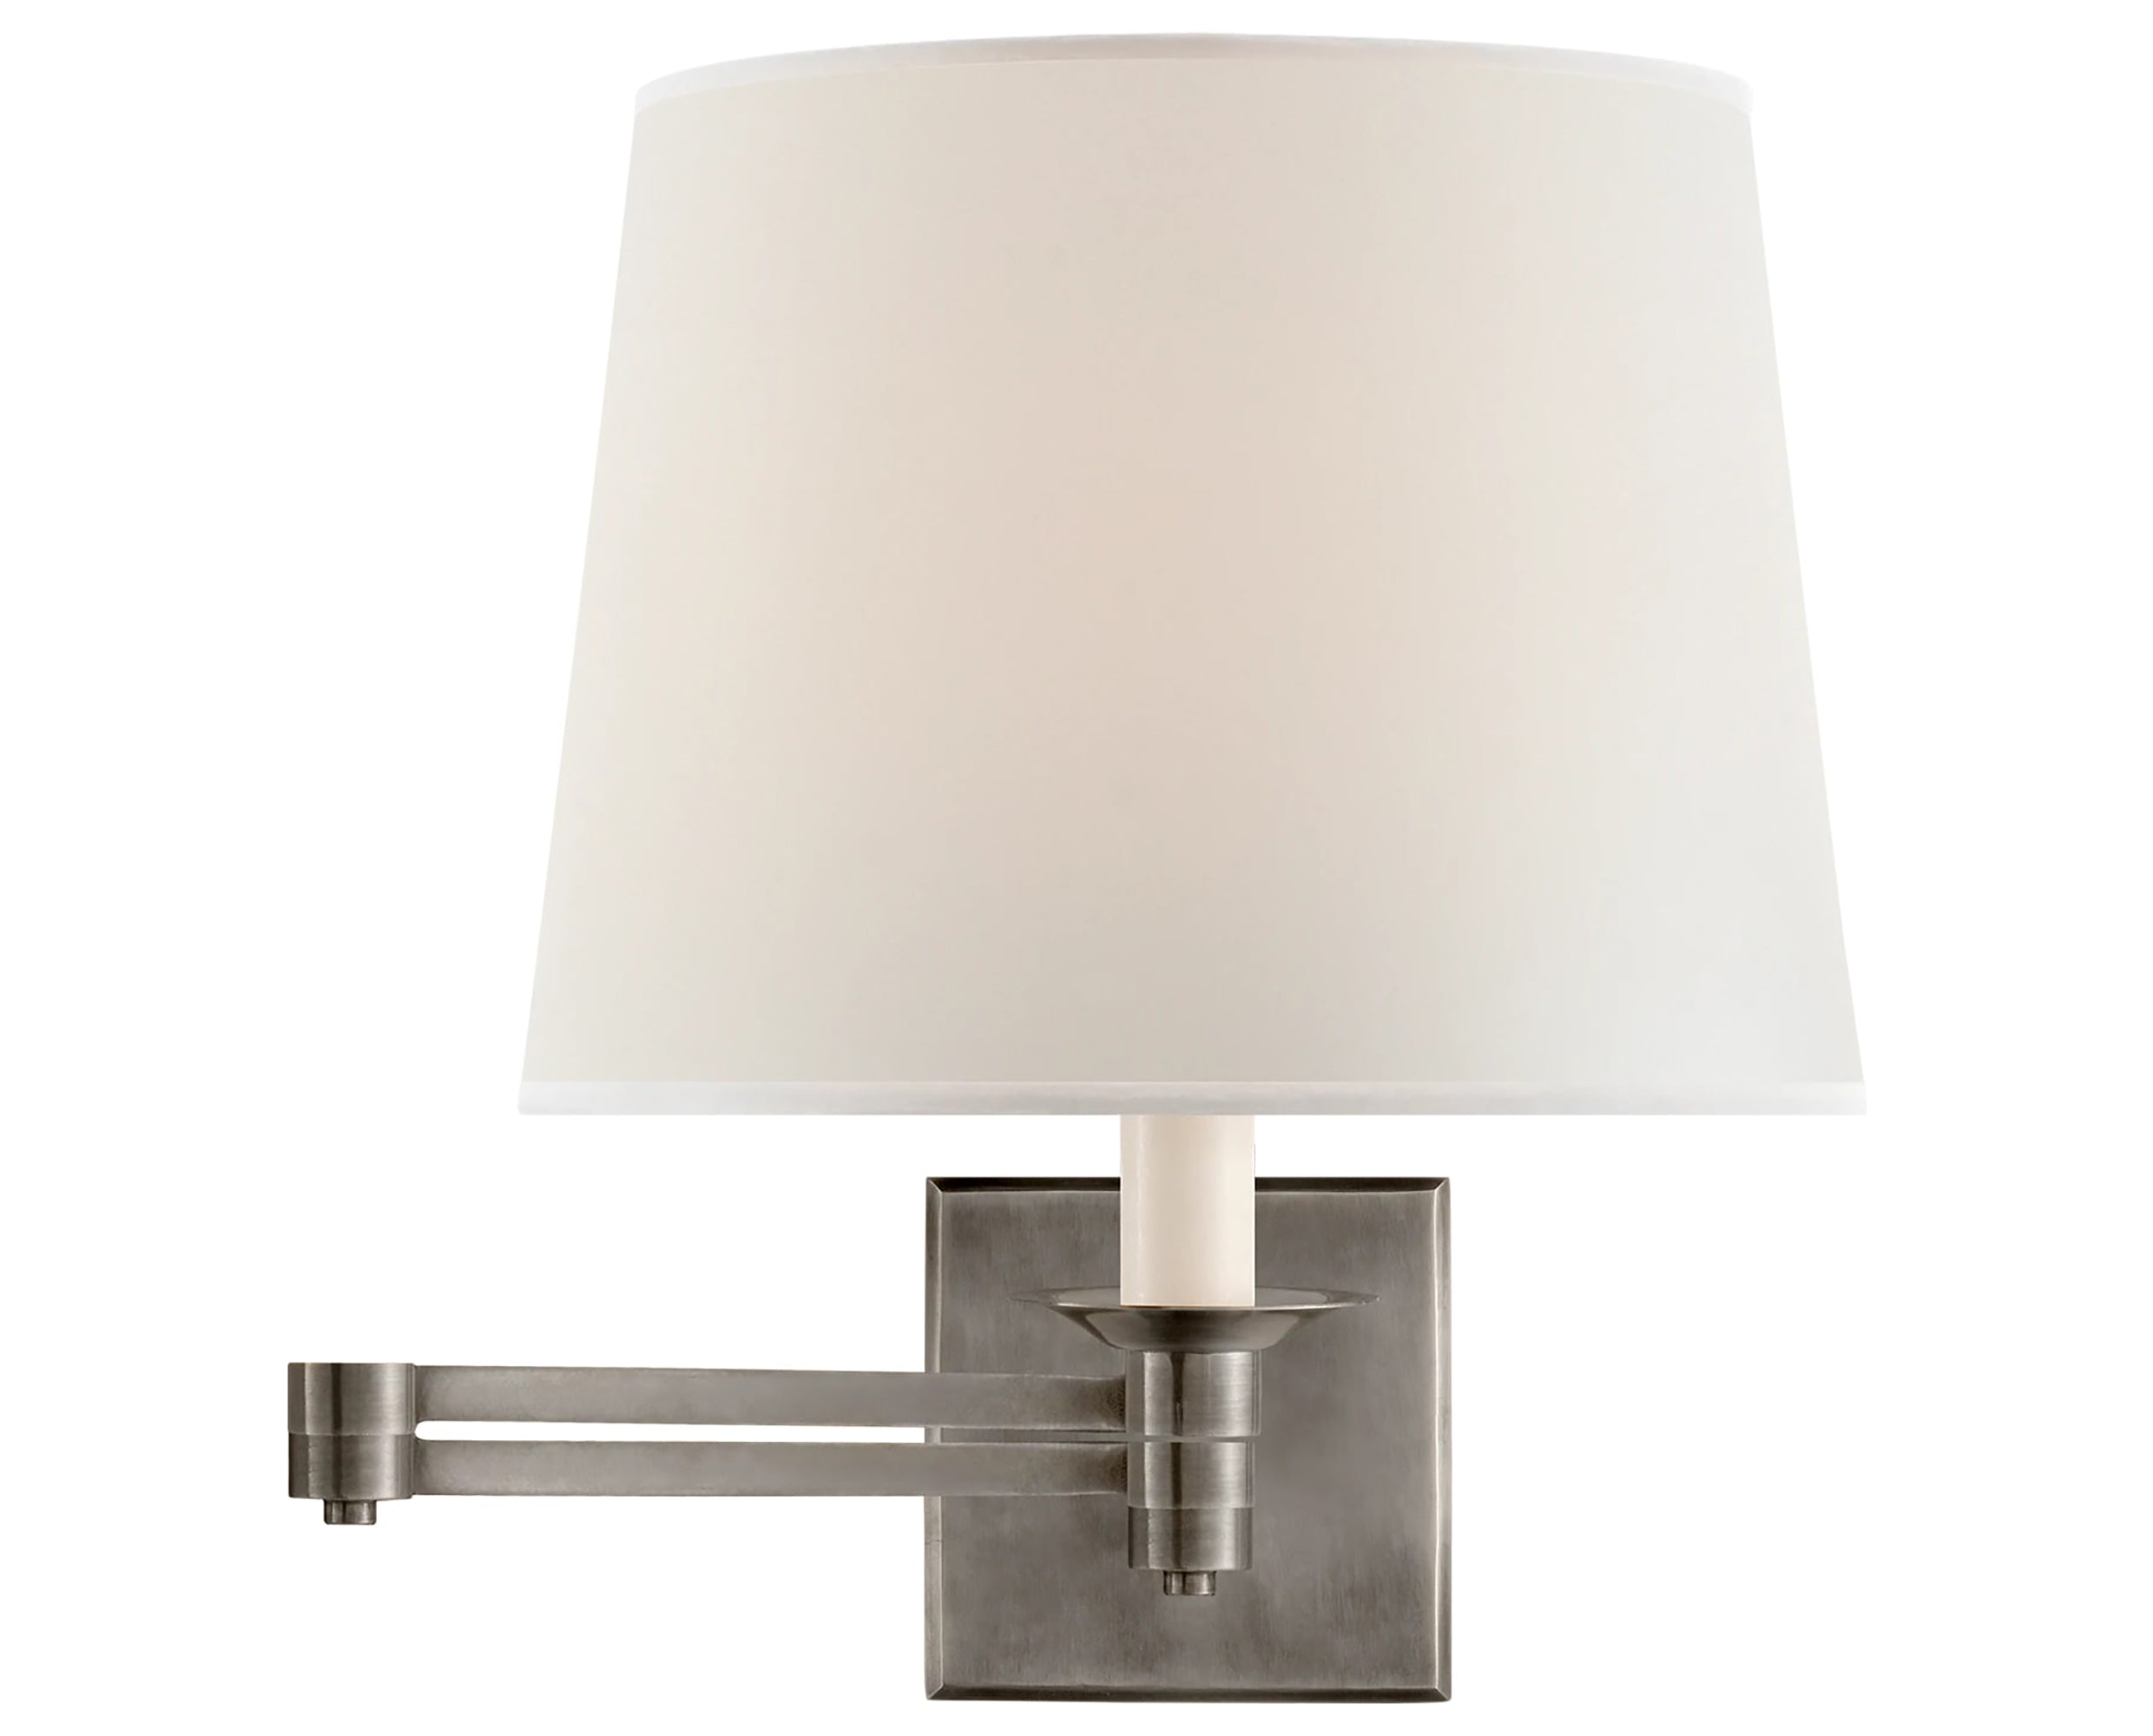 Antique Nickel &amp; Percale Nordy | Evans Swing Arm Sconce | Valley Ridge Furniture